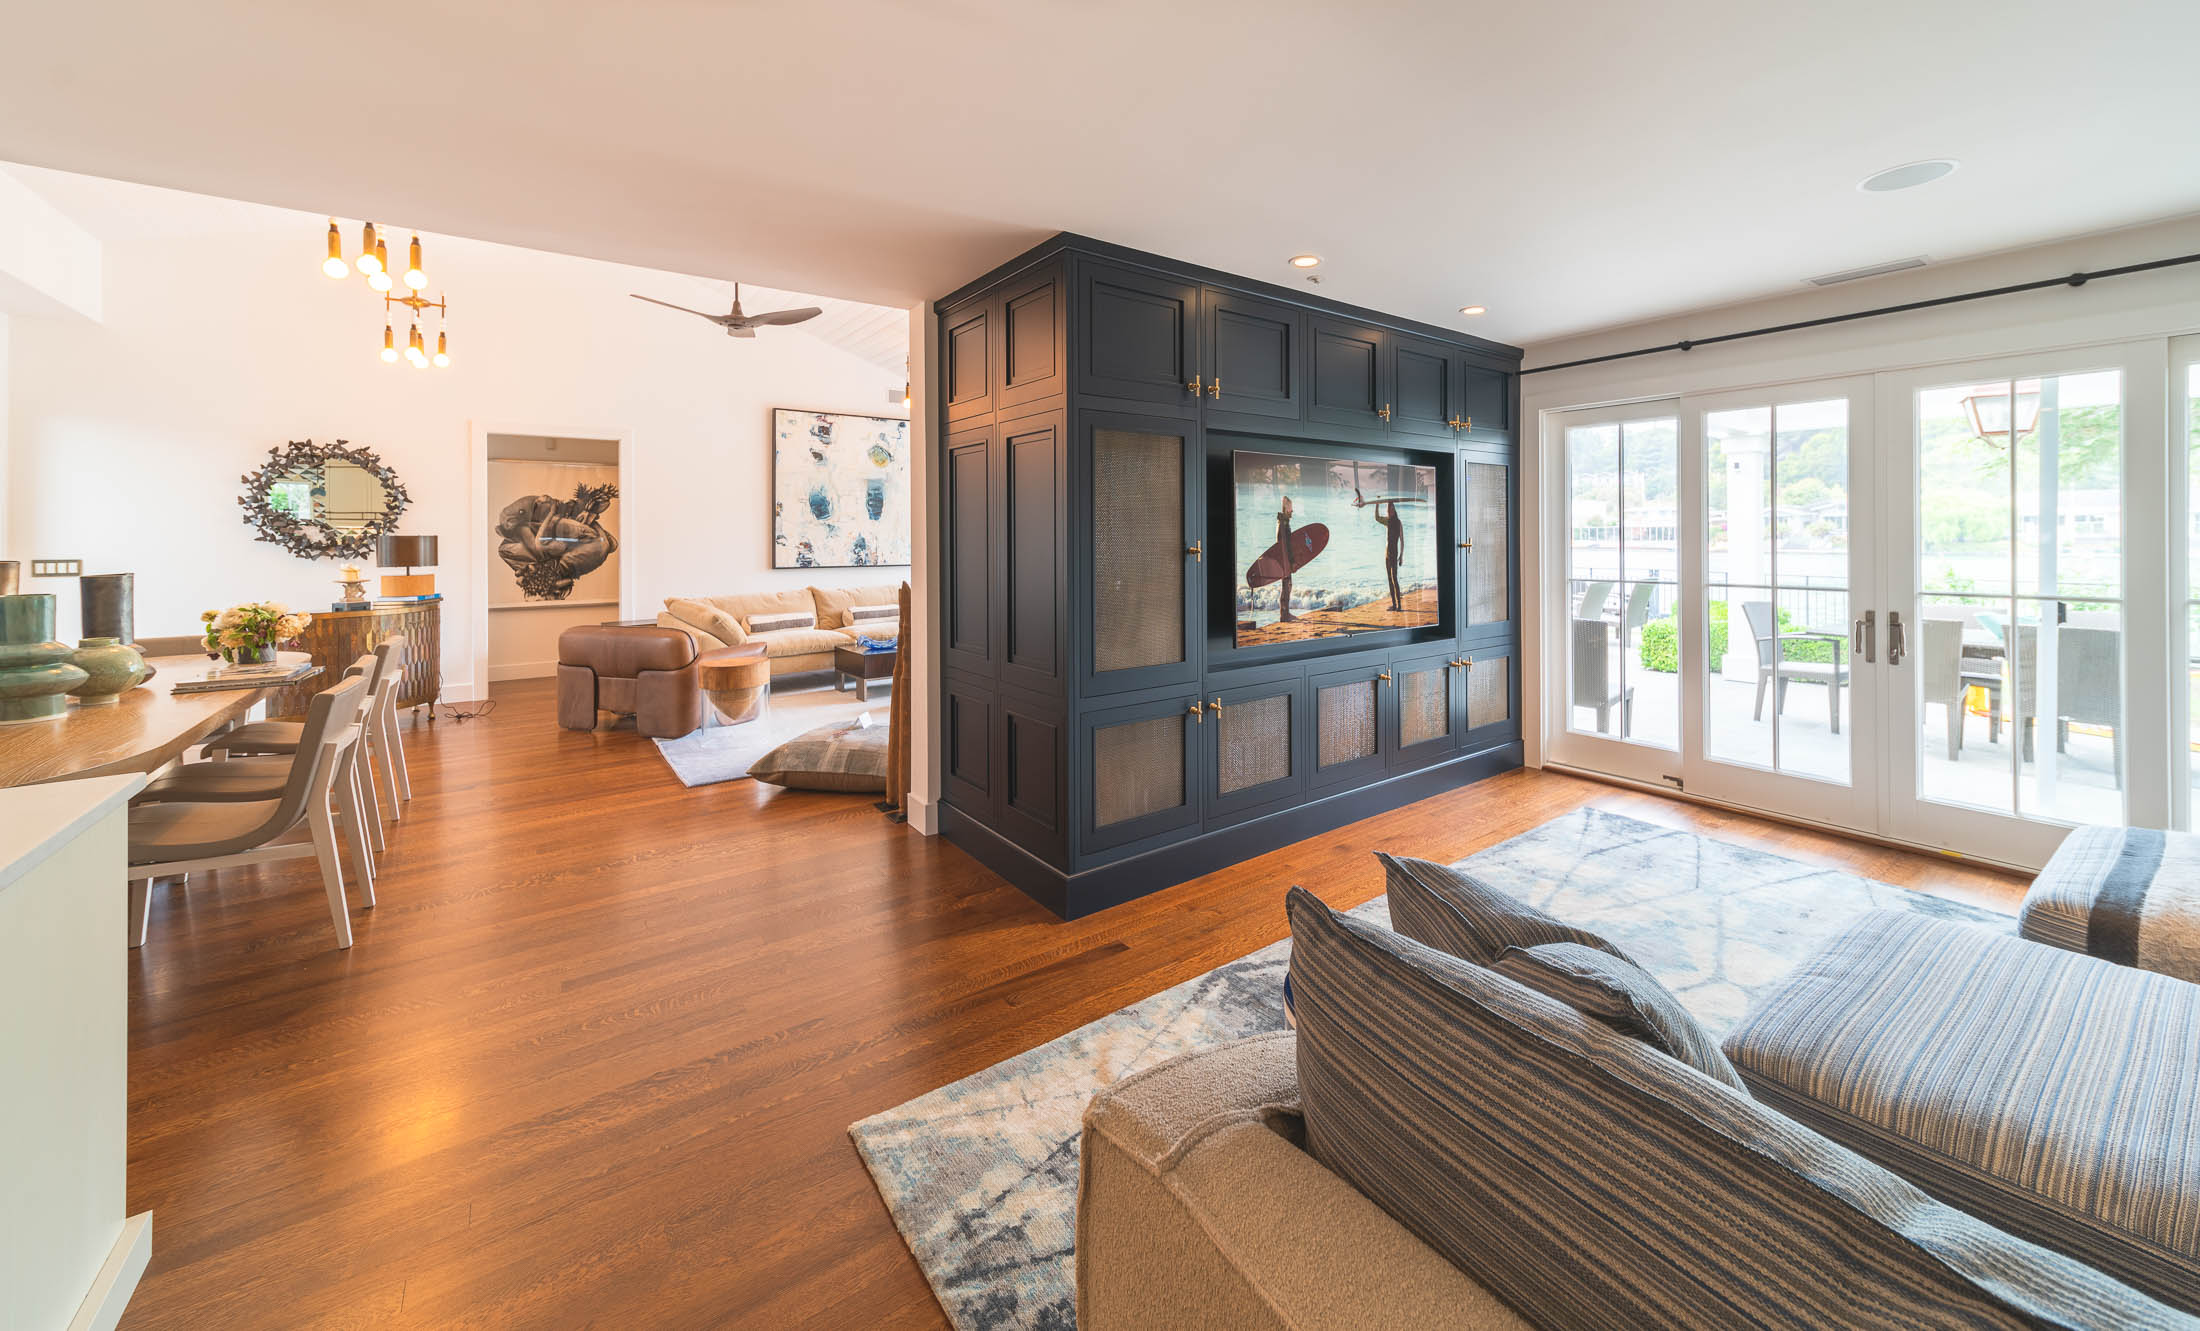 Open floor plan with a TV in a custom cabinet with home-wide audio in the ceiling